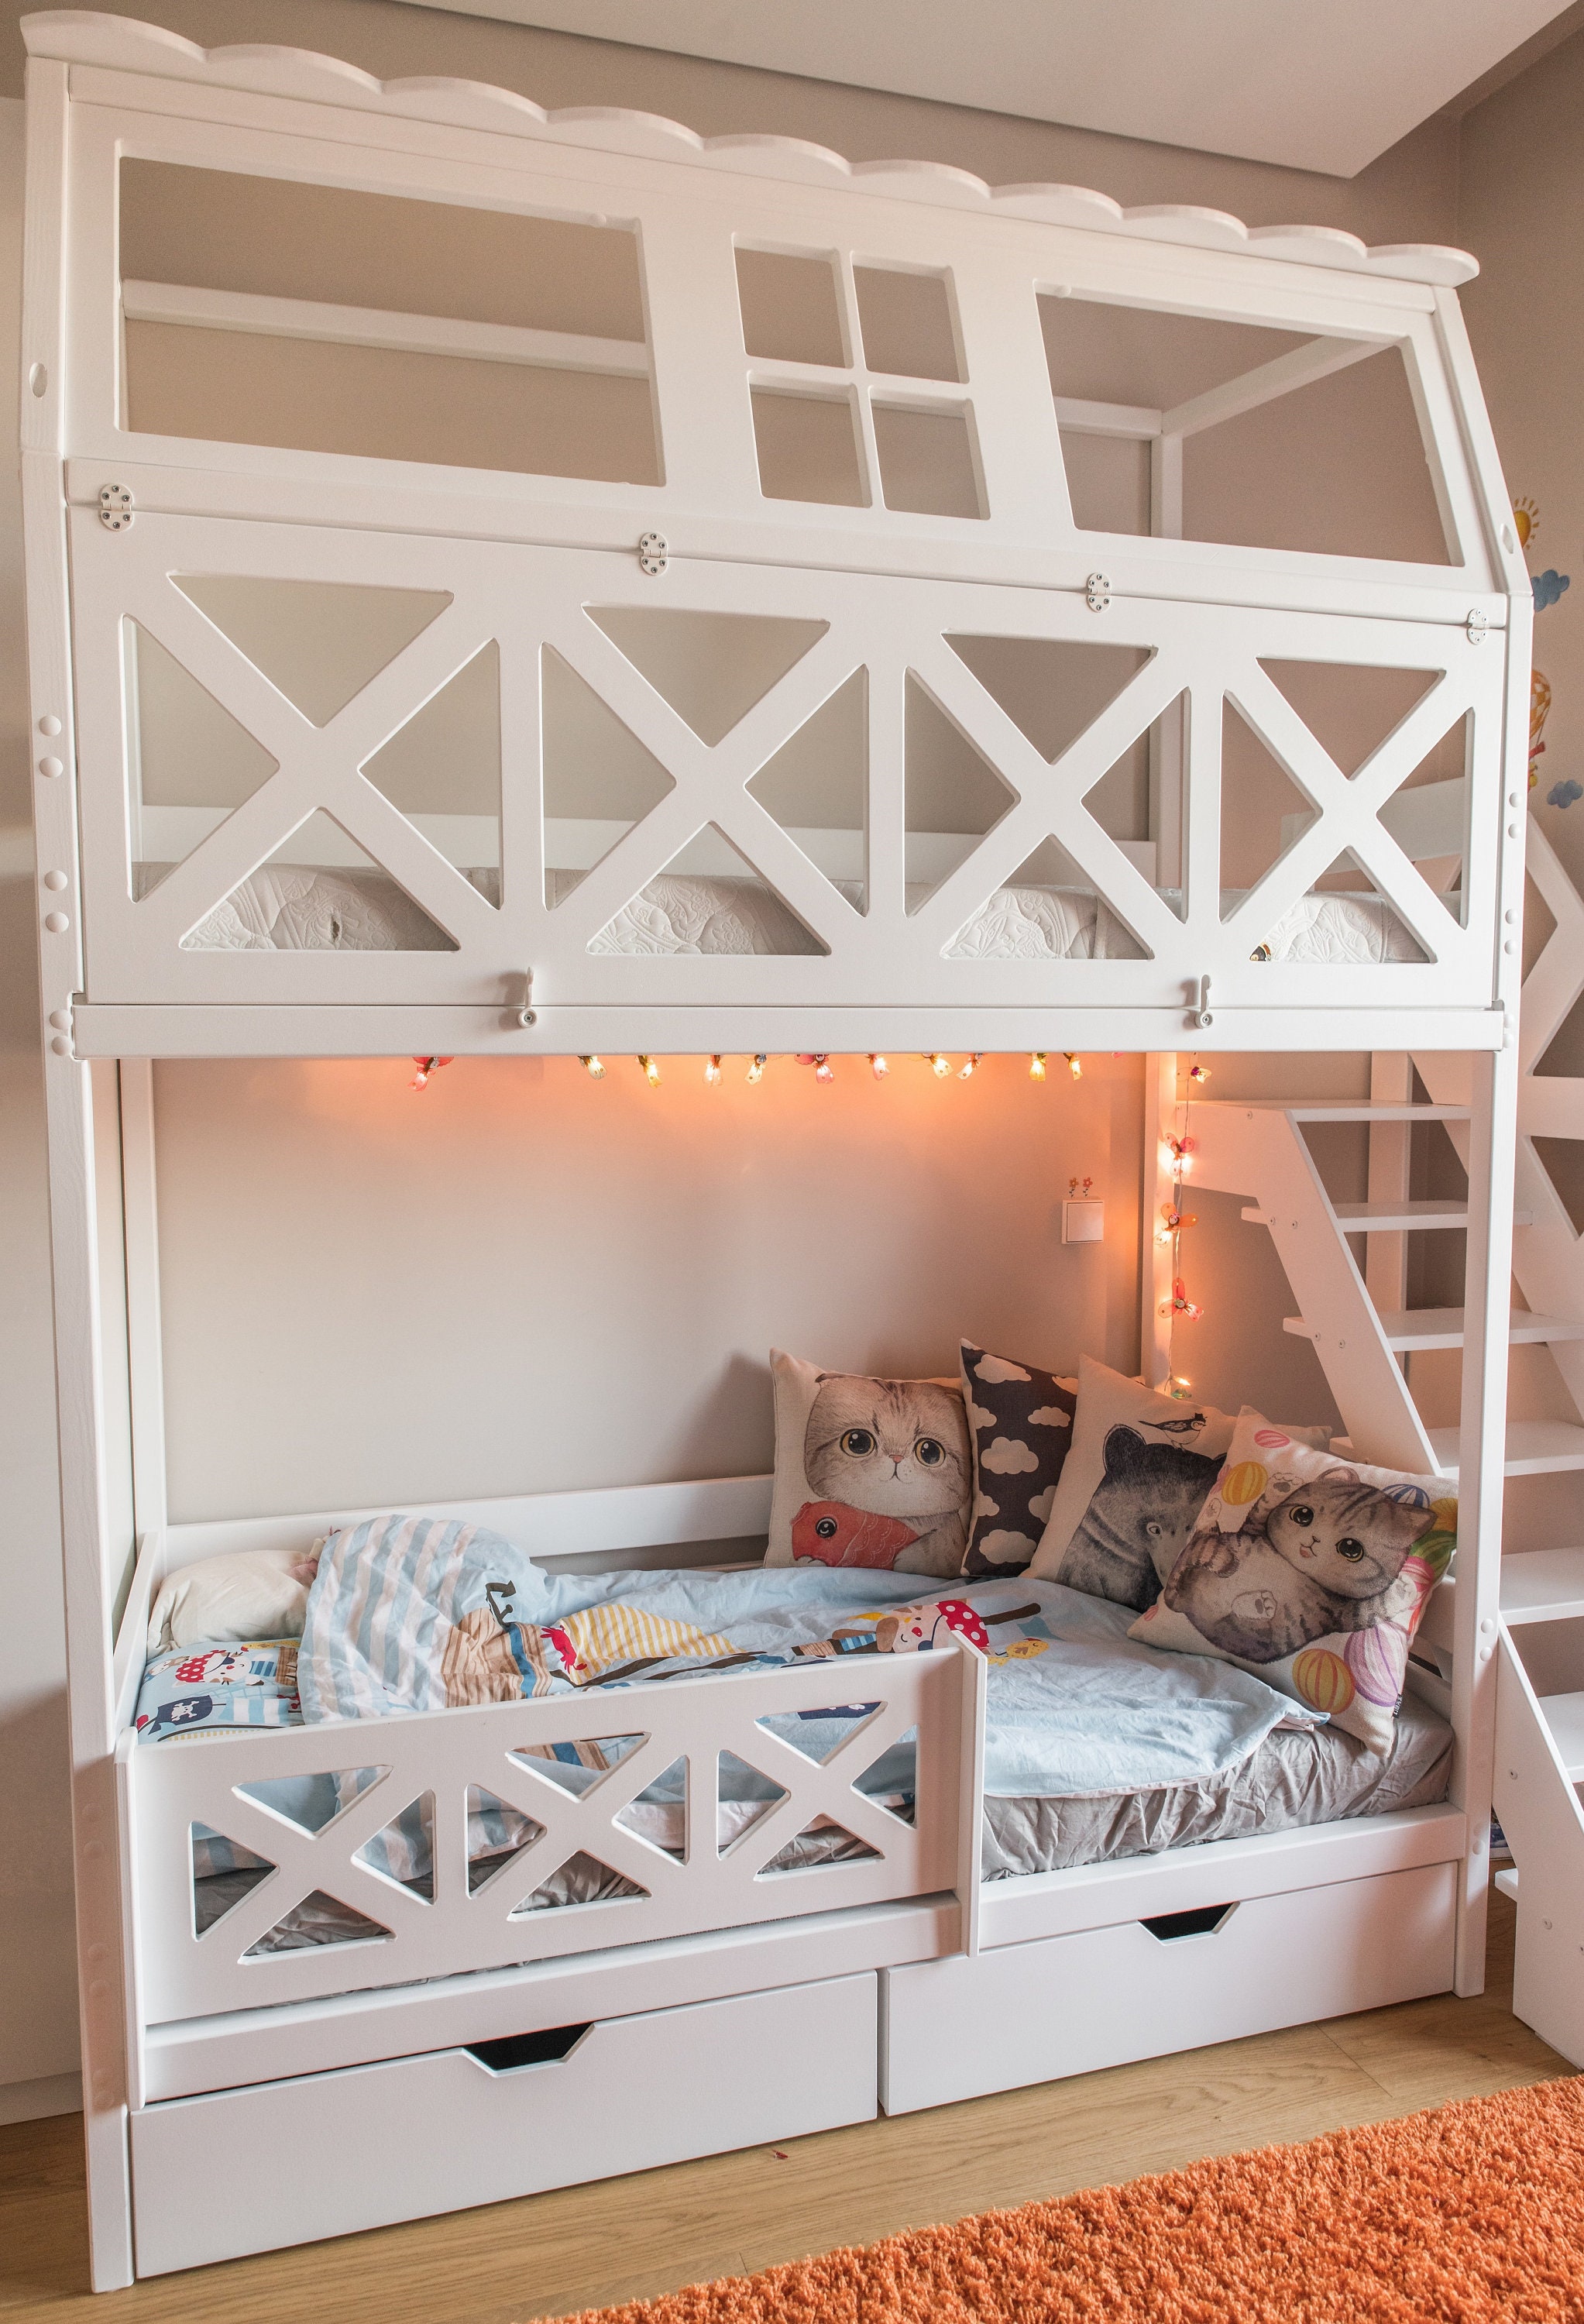 Kids Twin Size Bunk Bed White Slide Loft Child Bedroom Furniture Playhouse Area 